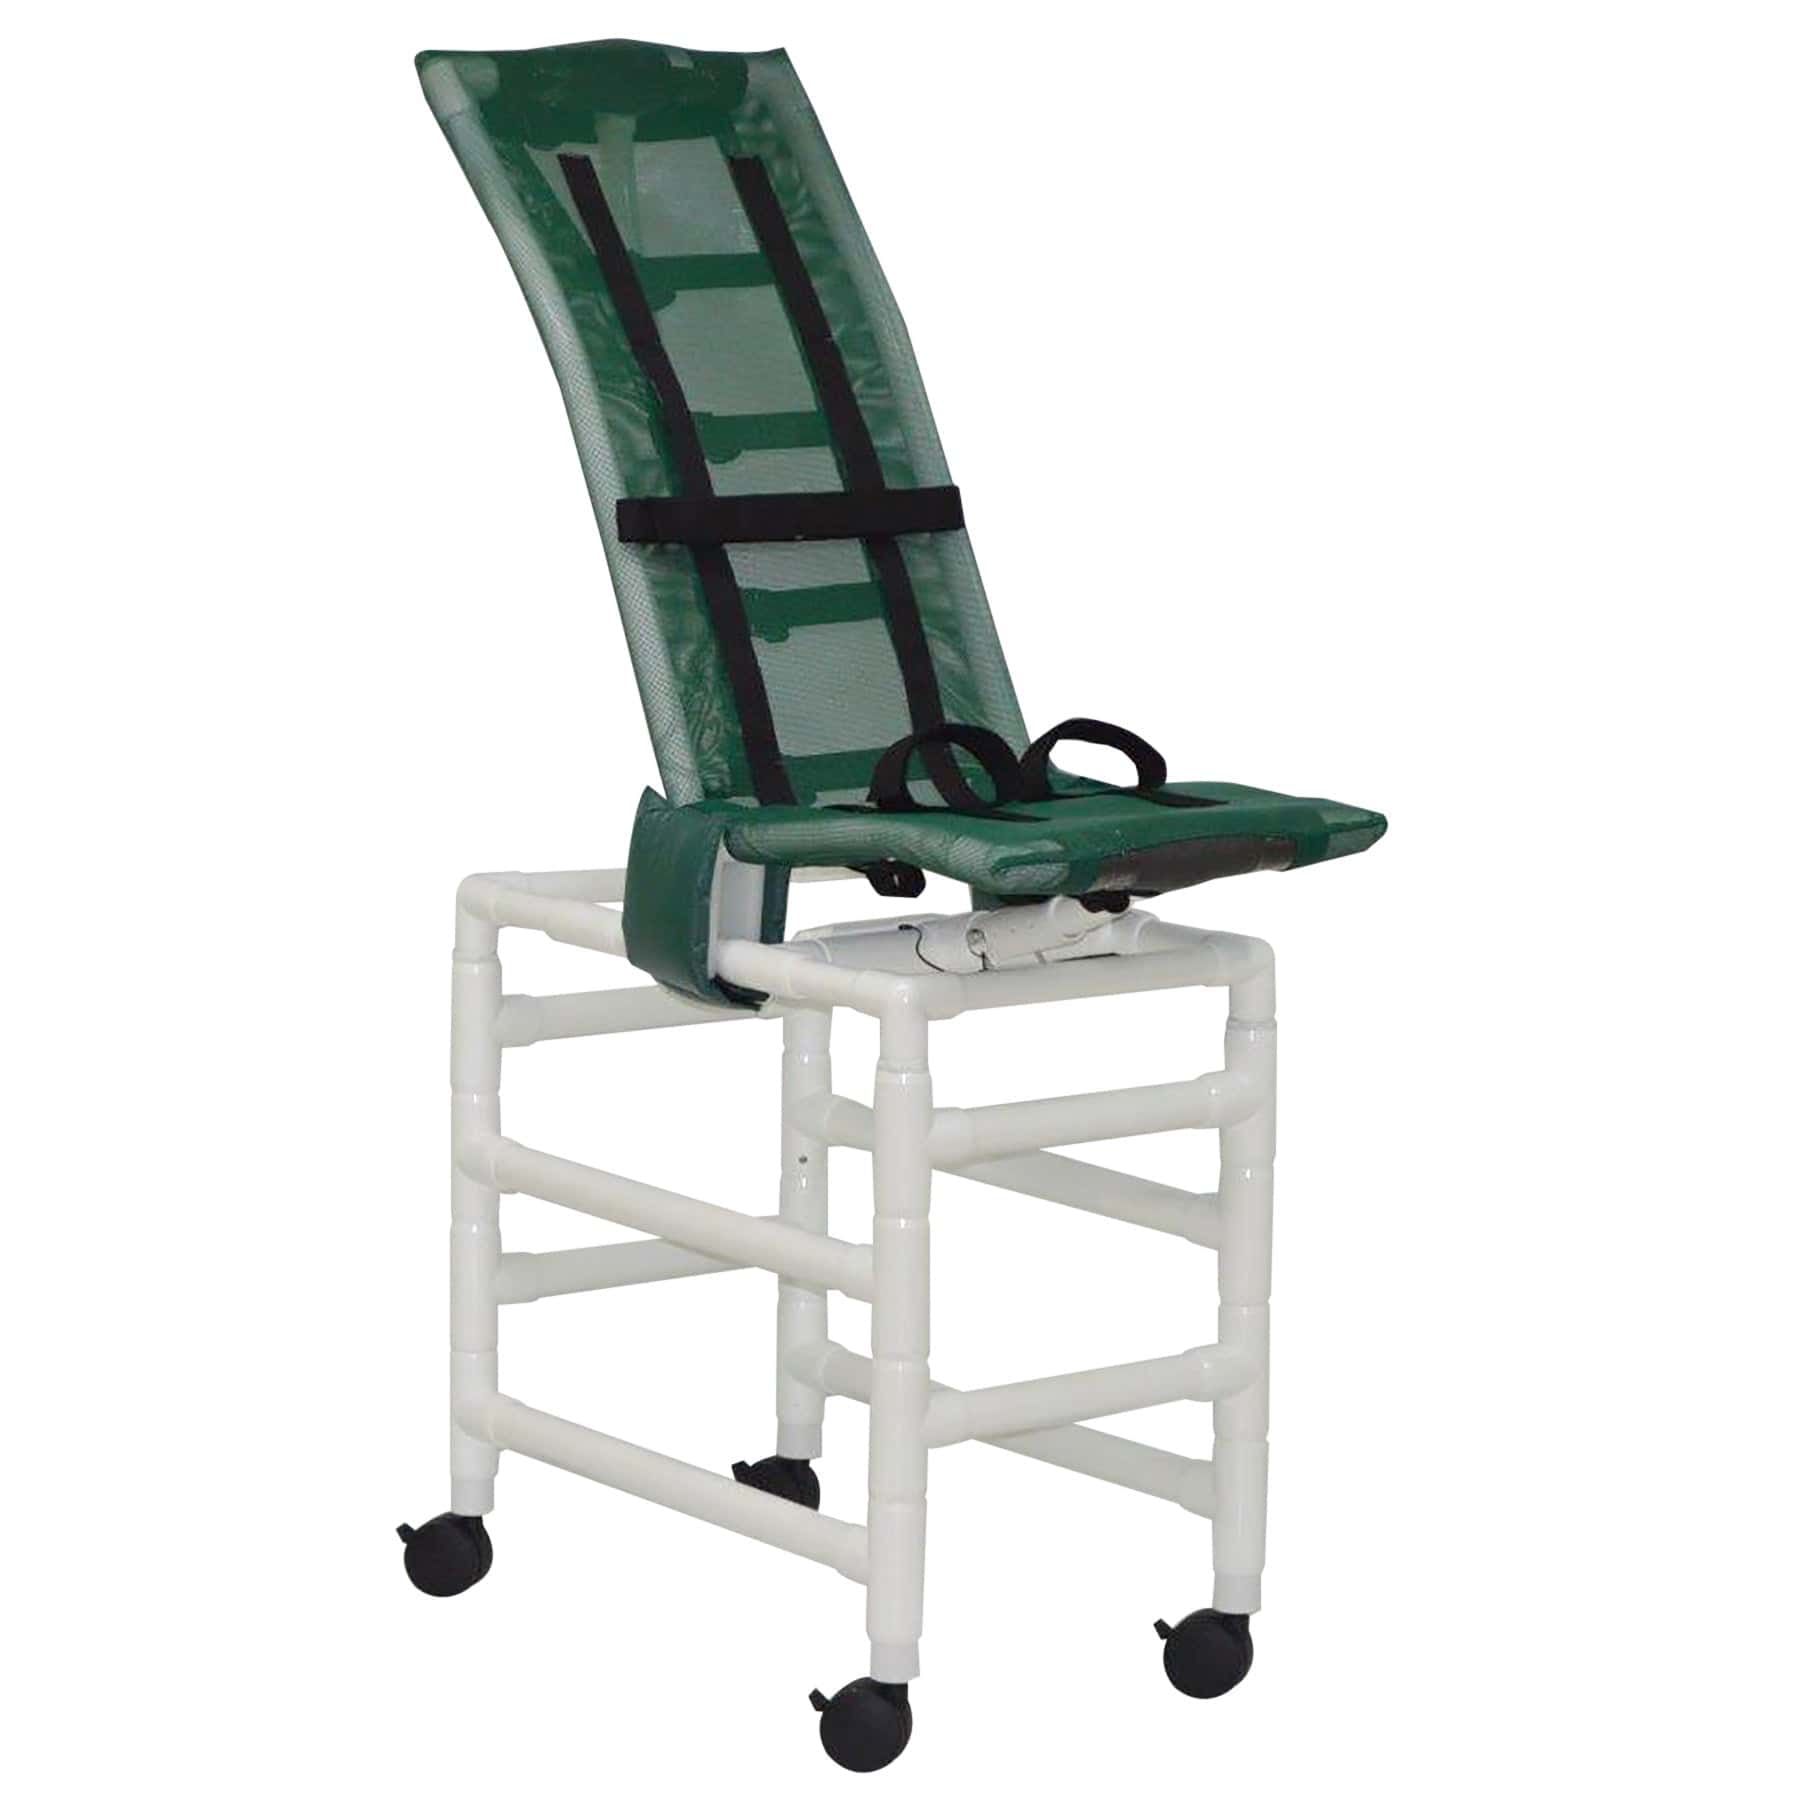 MJM International Pediatric-Reclining Chairs MJM International Large Articulating Shower Chair With Base Extension And Casters